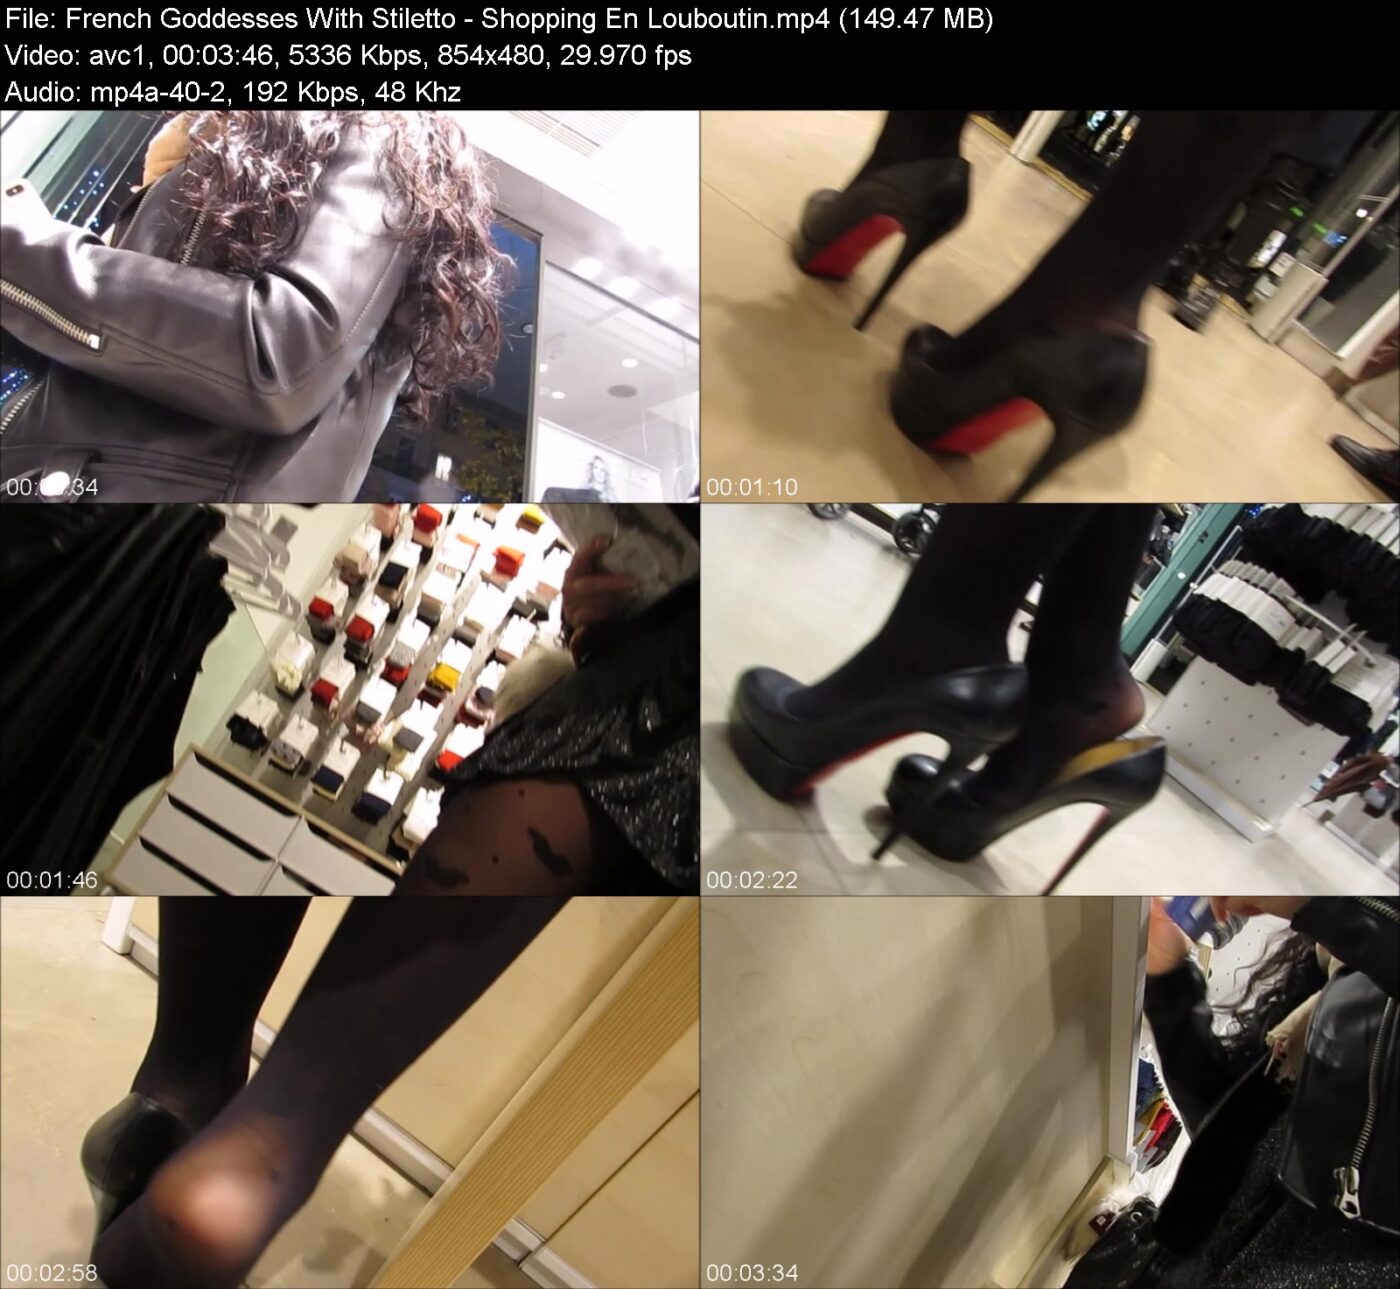 Actress: French Goddesses With Stiletto. Title and Studio: Shopping En Louboutin